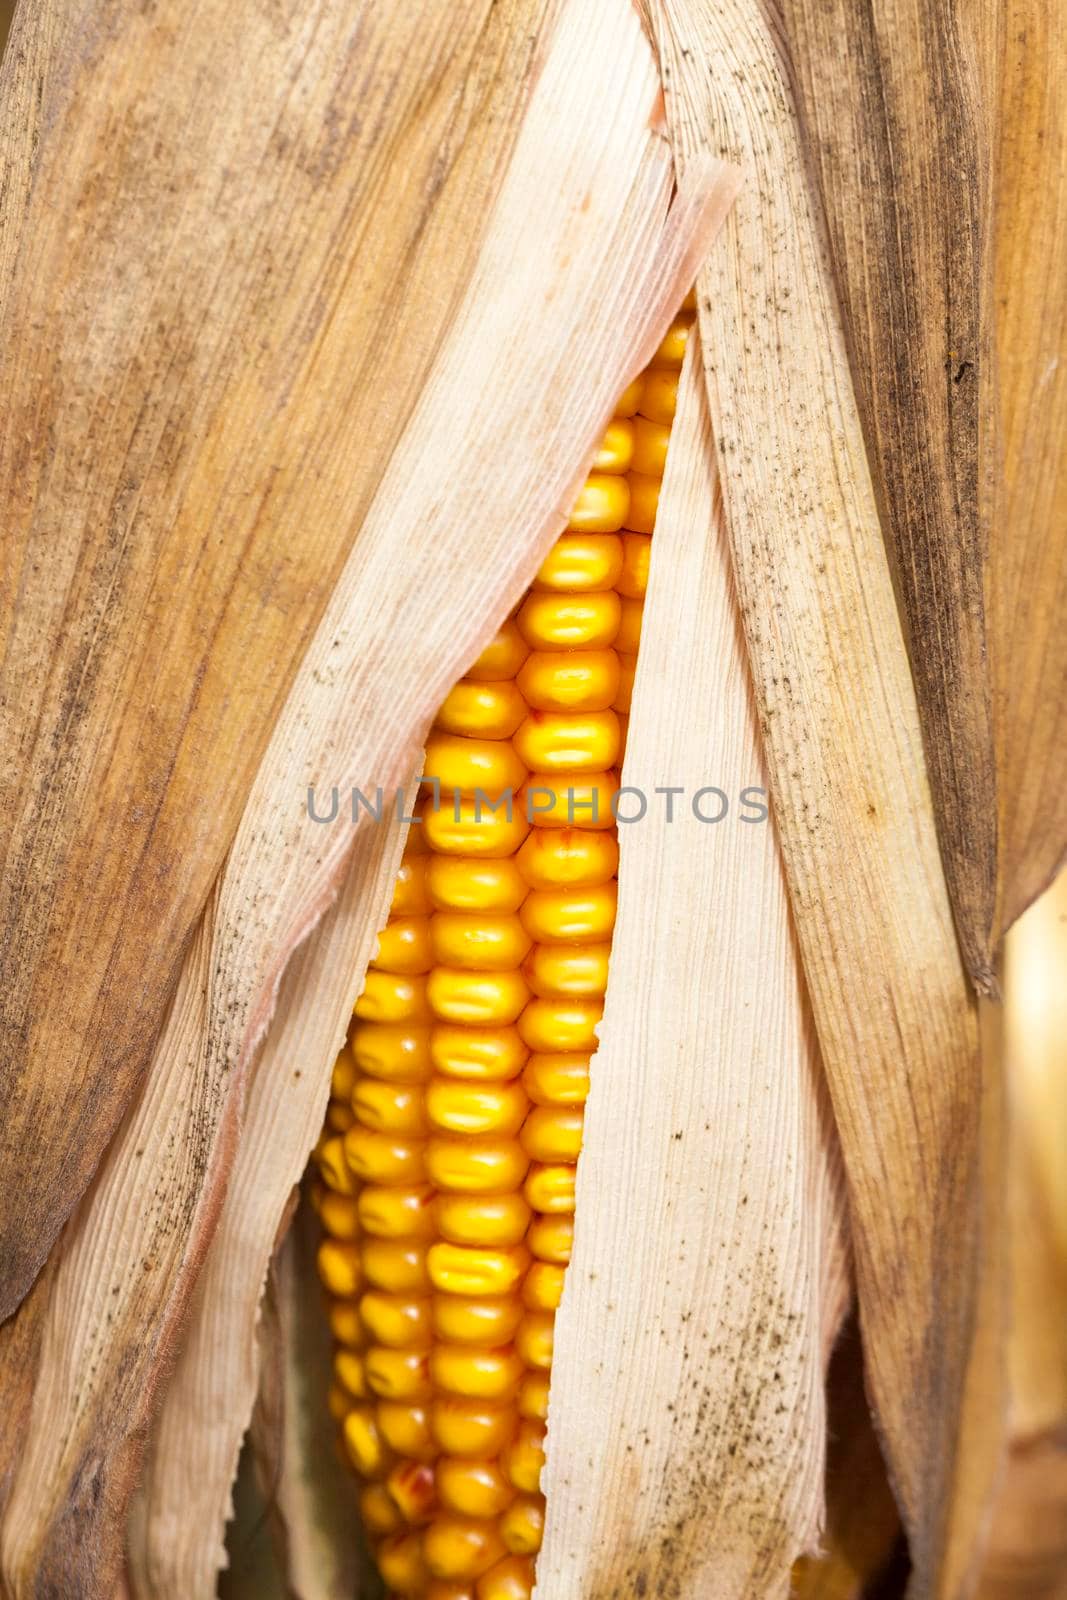 photographed mature corn yellow, growing on the territory of the farmland field. close-up